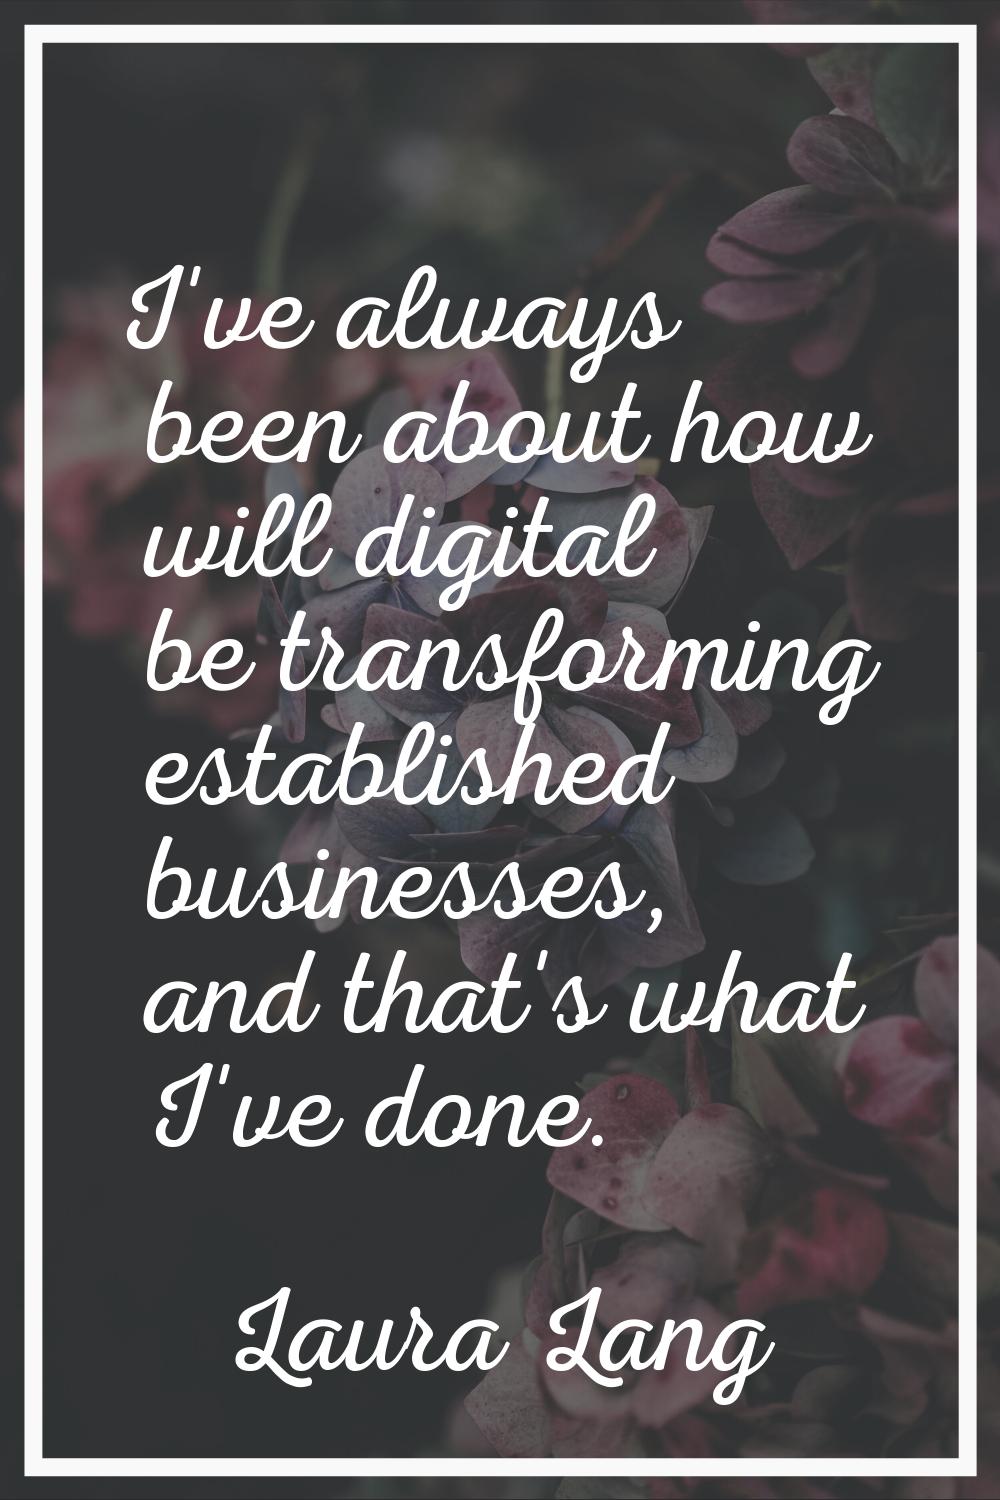 I've always been about how will digital be transforming established businesses, and that's what I'v